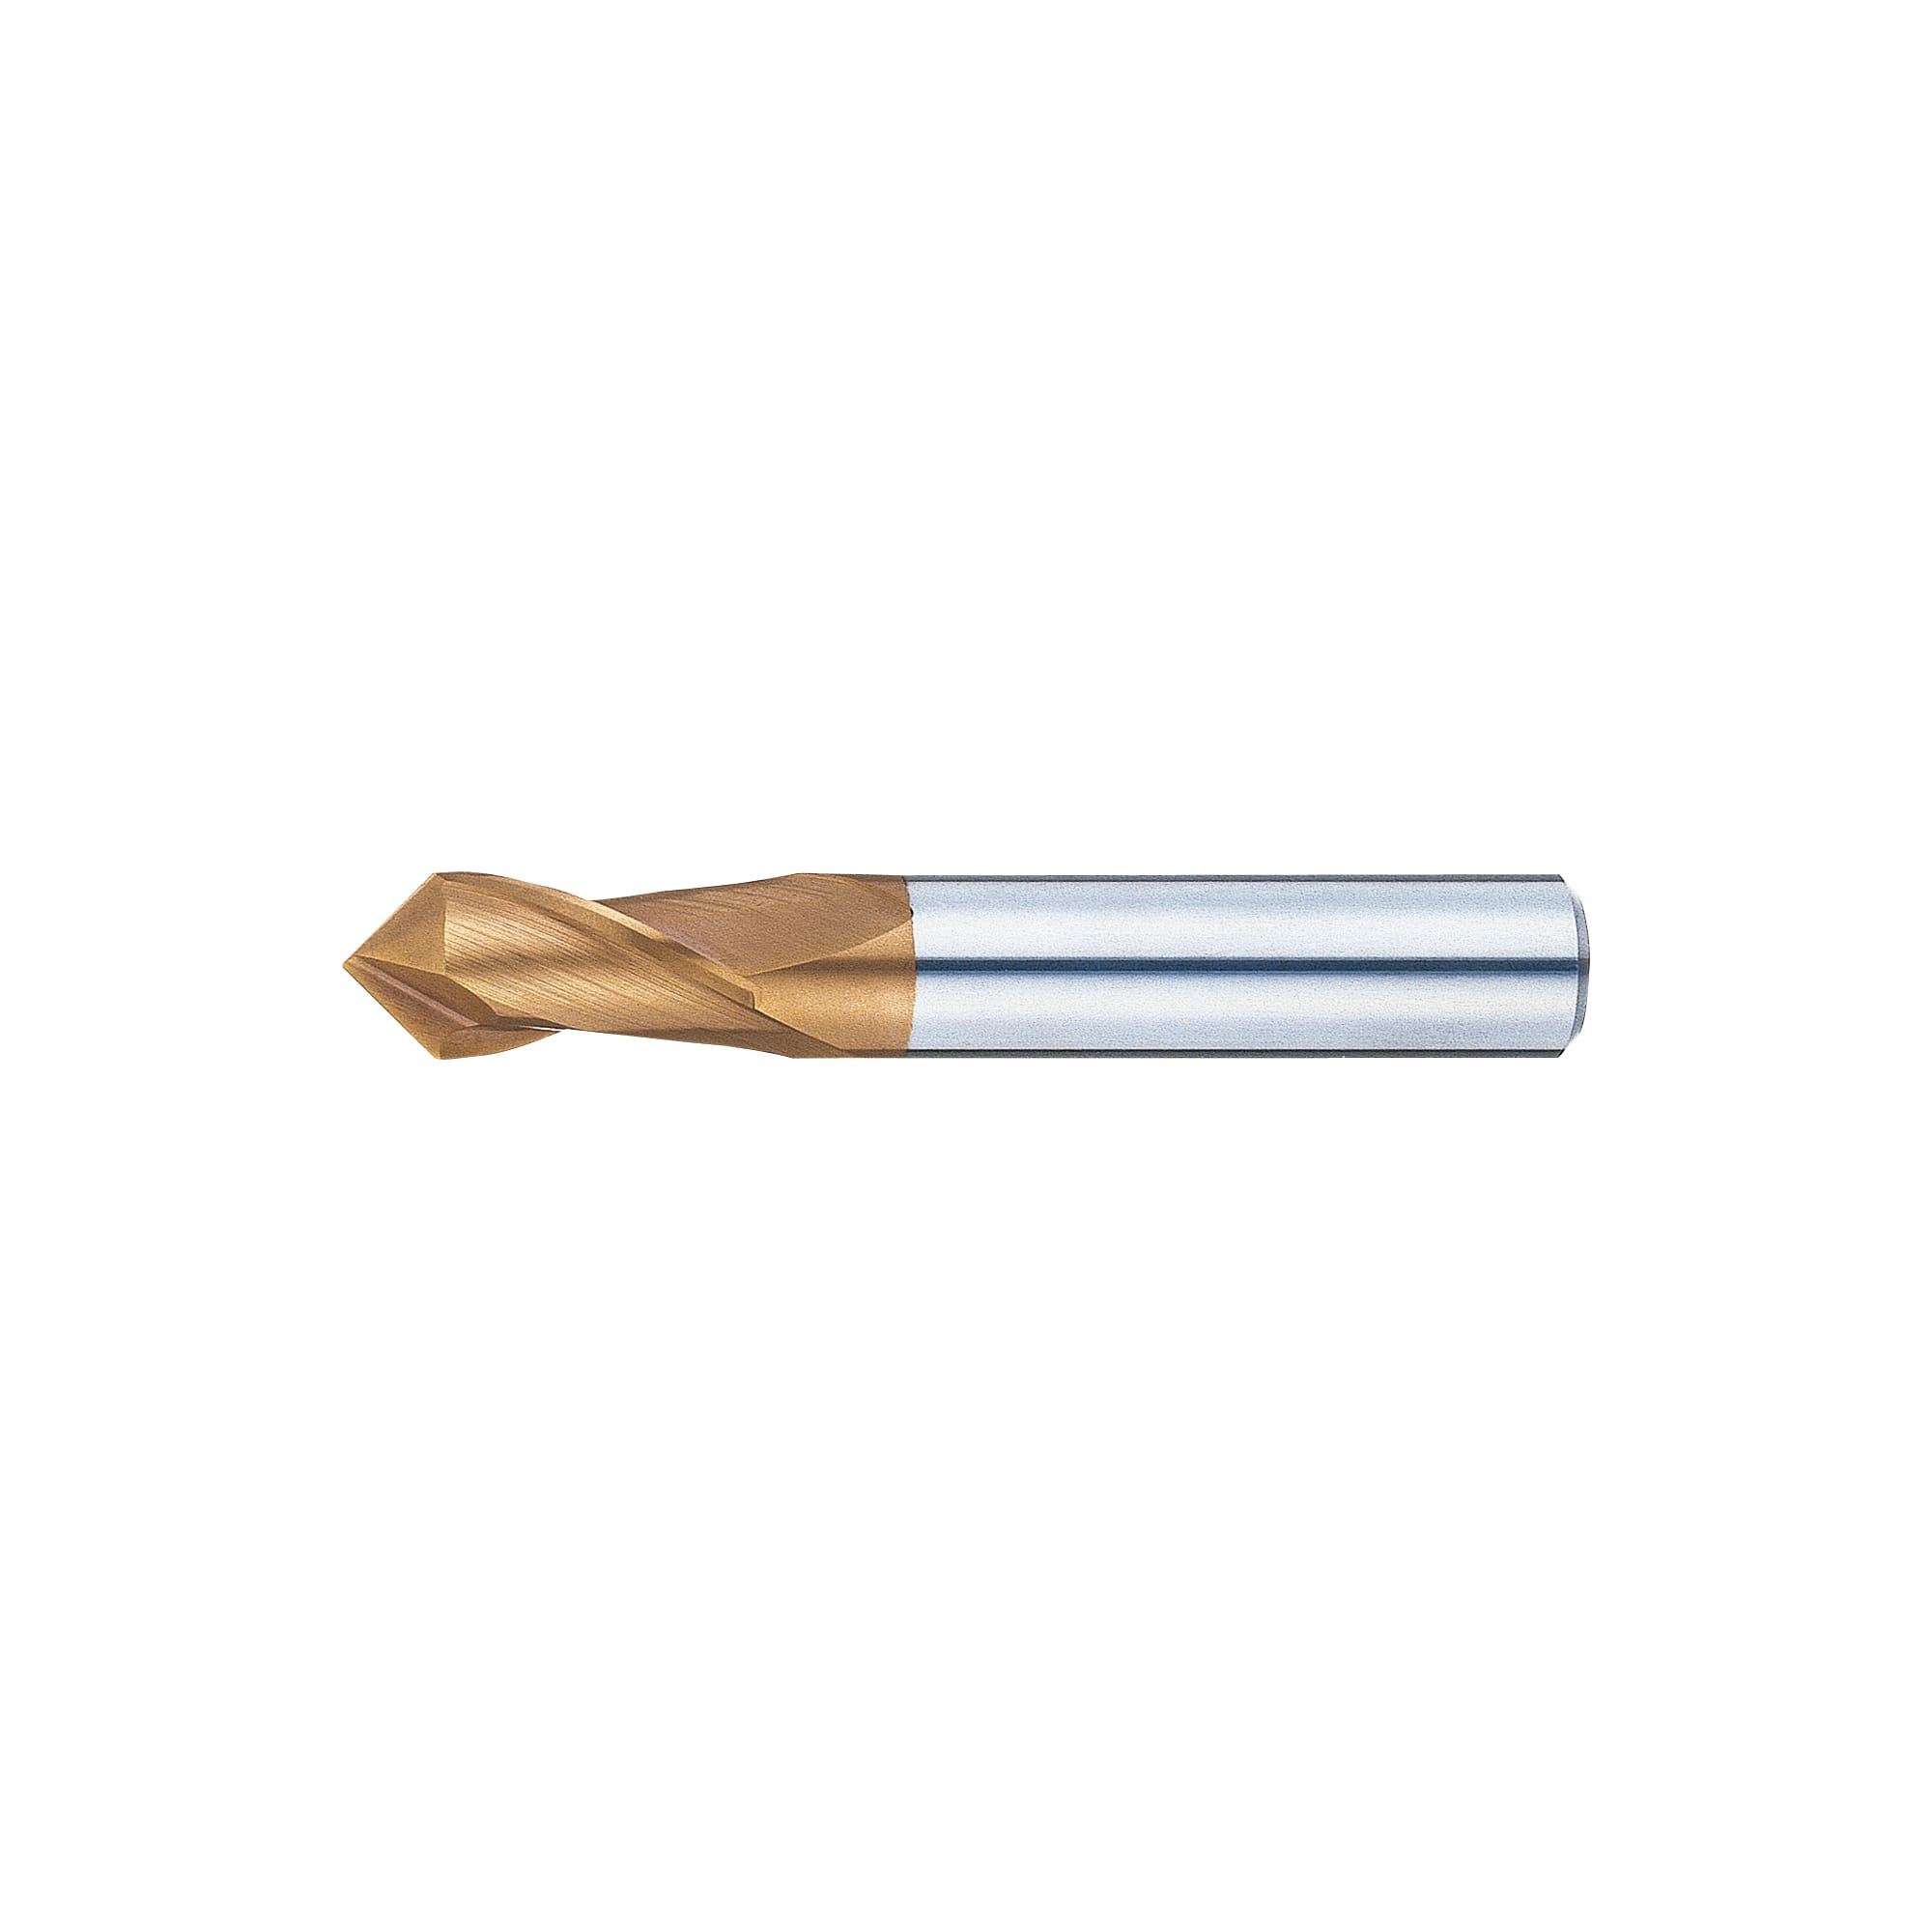 2 Flute Radius Corner End Pack of 1 Bassett MSE-2 Series Solid Carbide General Purpose End Mill Uncoated 30 Degrees Helix Finish 1/4 Cutting Diameter Bright 0.5 Cutting Length 2 Length